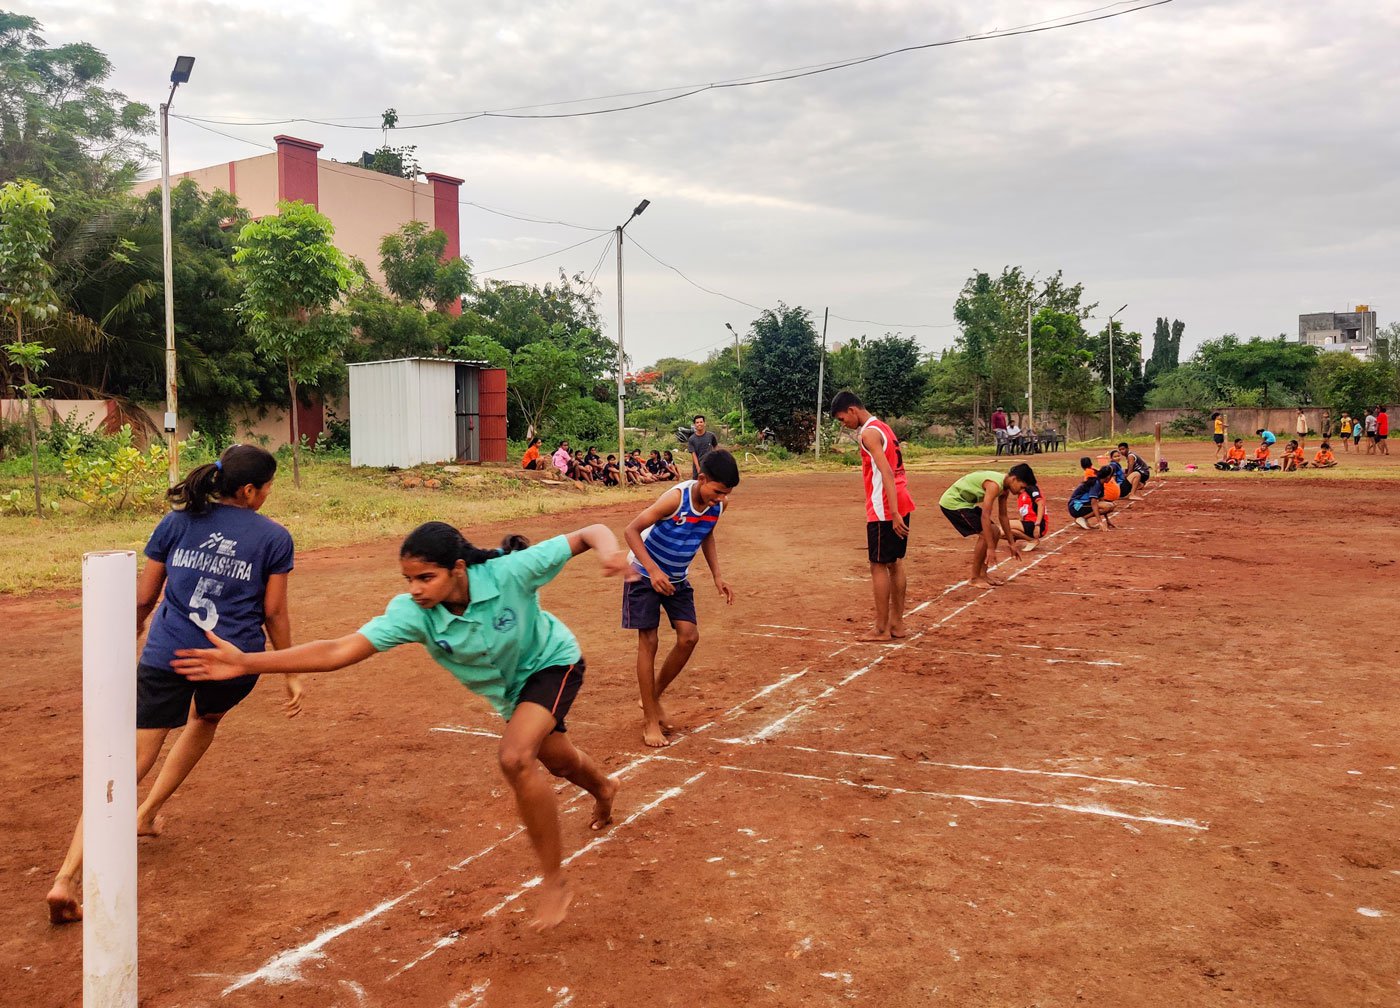 Promotion of kho-kho in Osmanabad district has brought more players to the sport, but Covid-19 is affecting the progress of recent years